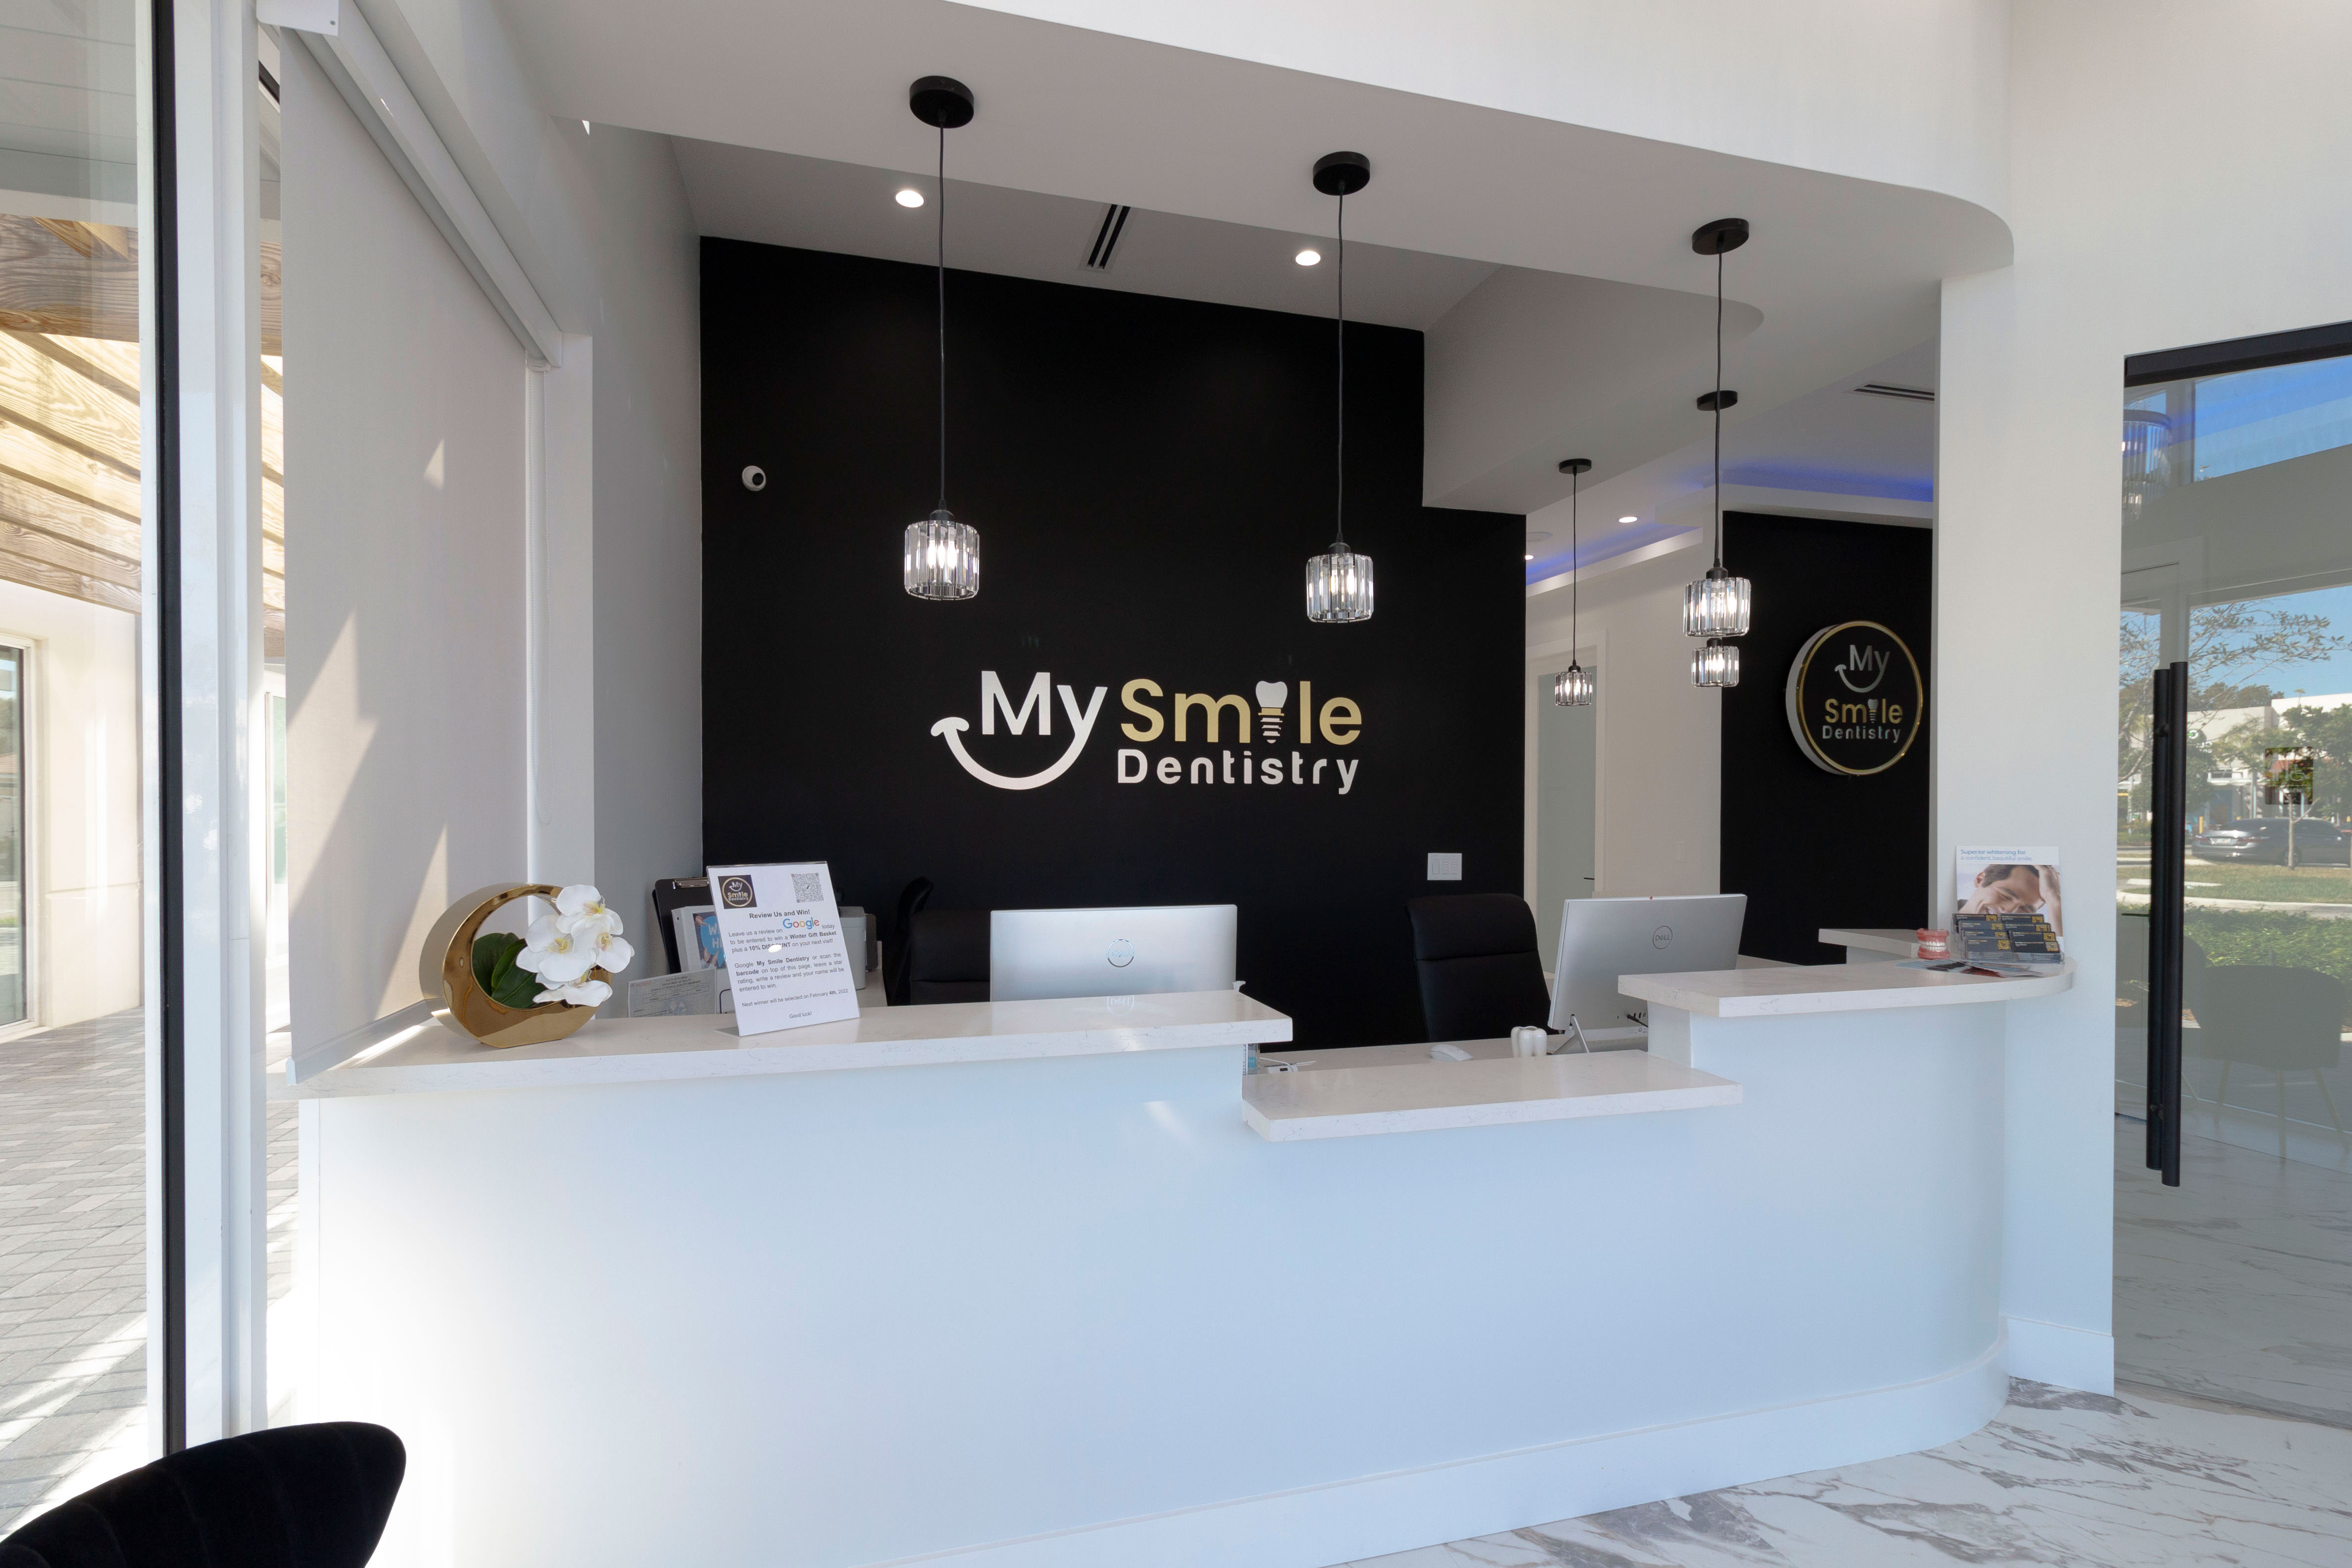 My Smile Dentistry | Teeth Cleaning, TMJ Disorders and Digital Radiography